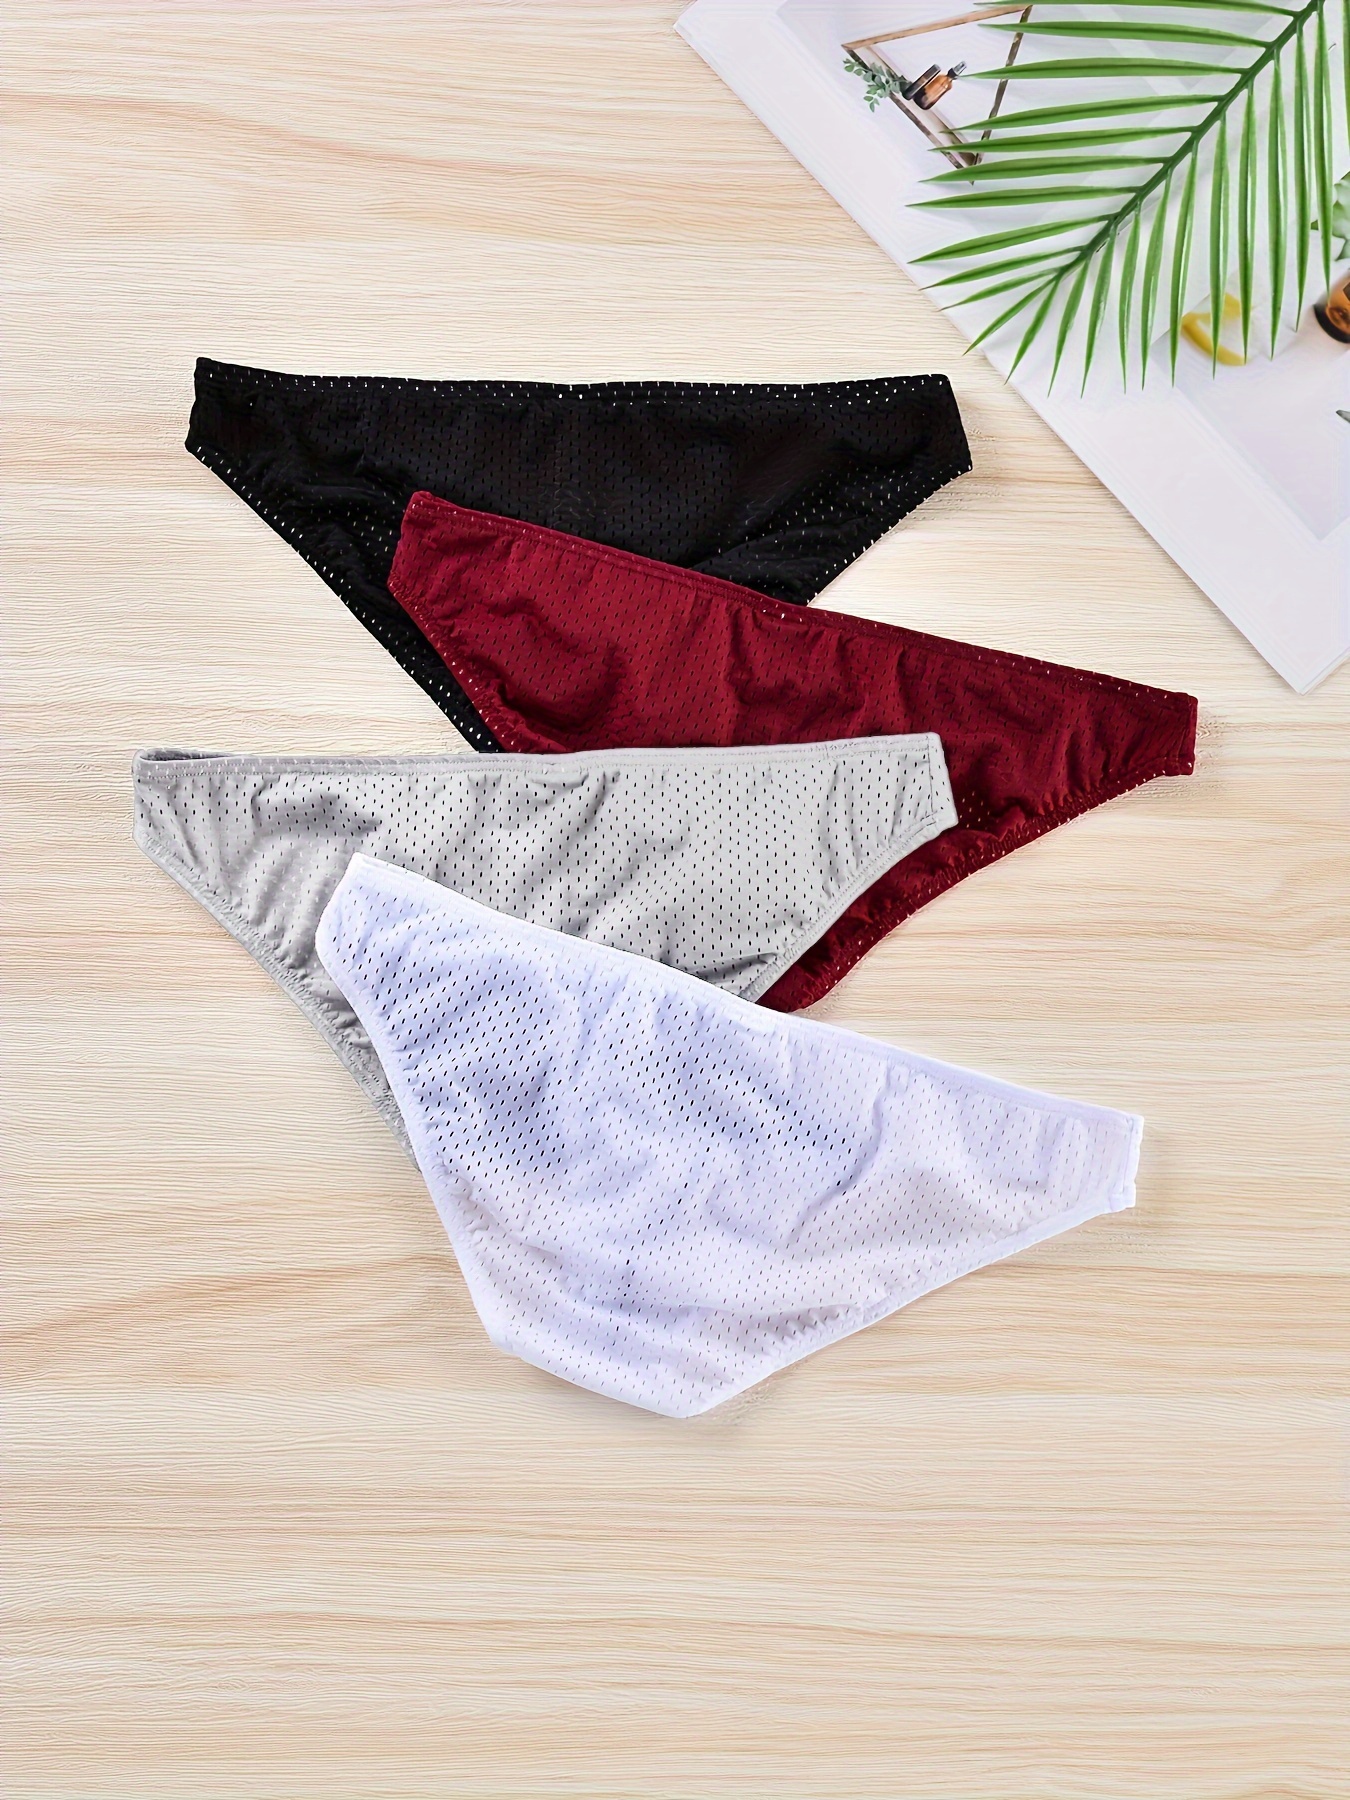 2023 New Lace Boxer Briefs for Women Women's Ice Silk Panties